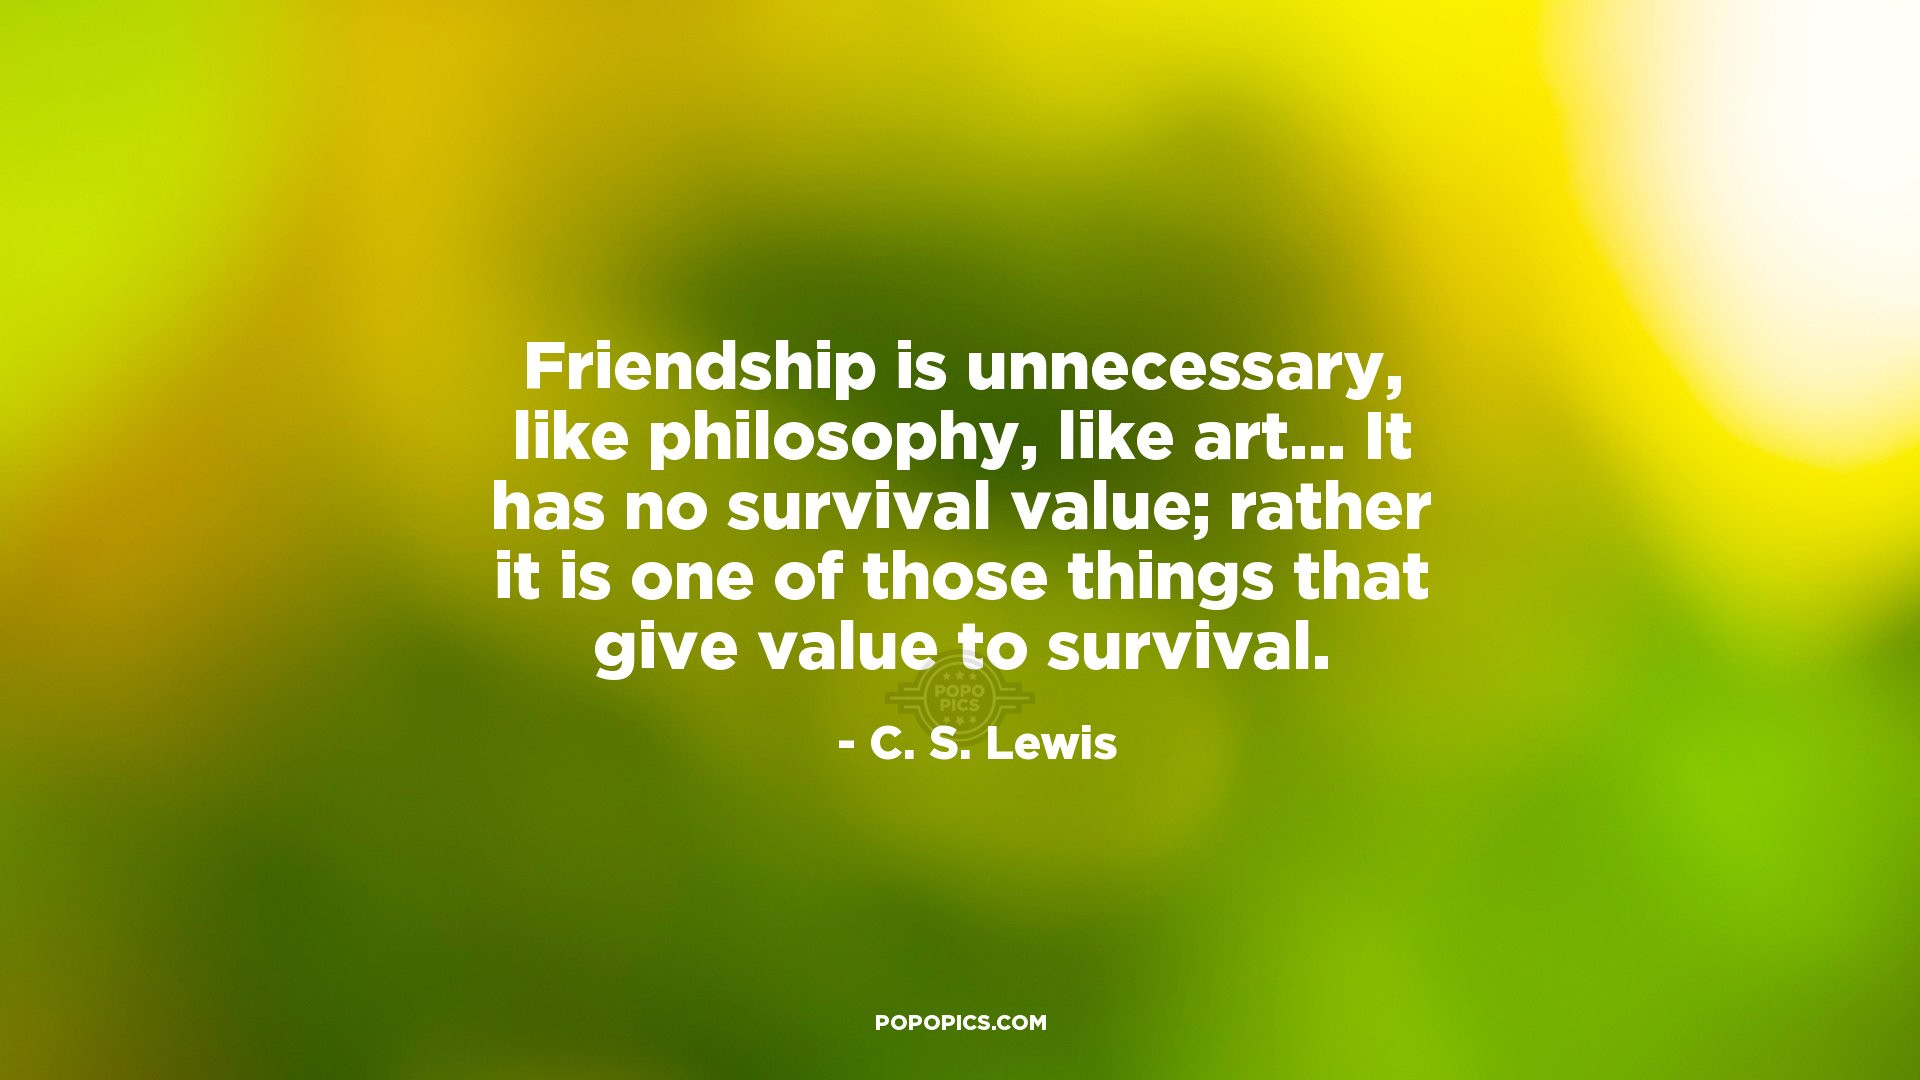 C.S.Lewis Friendship Quotes
 Friendship is unnecessary like philosophy like